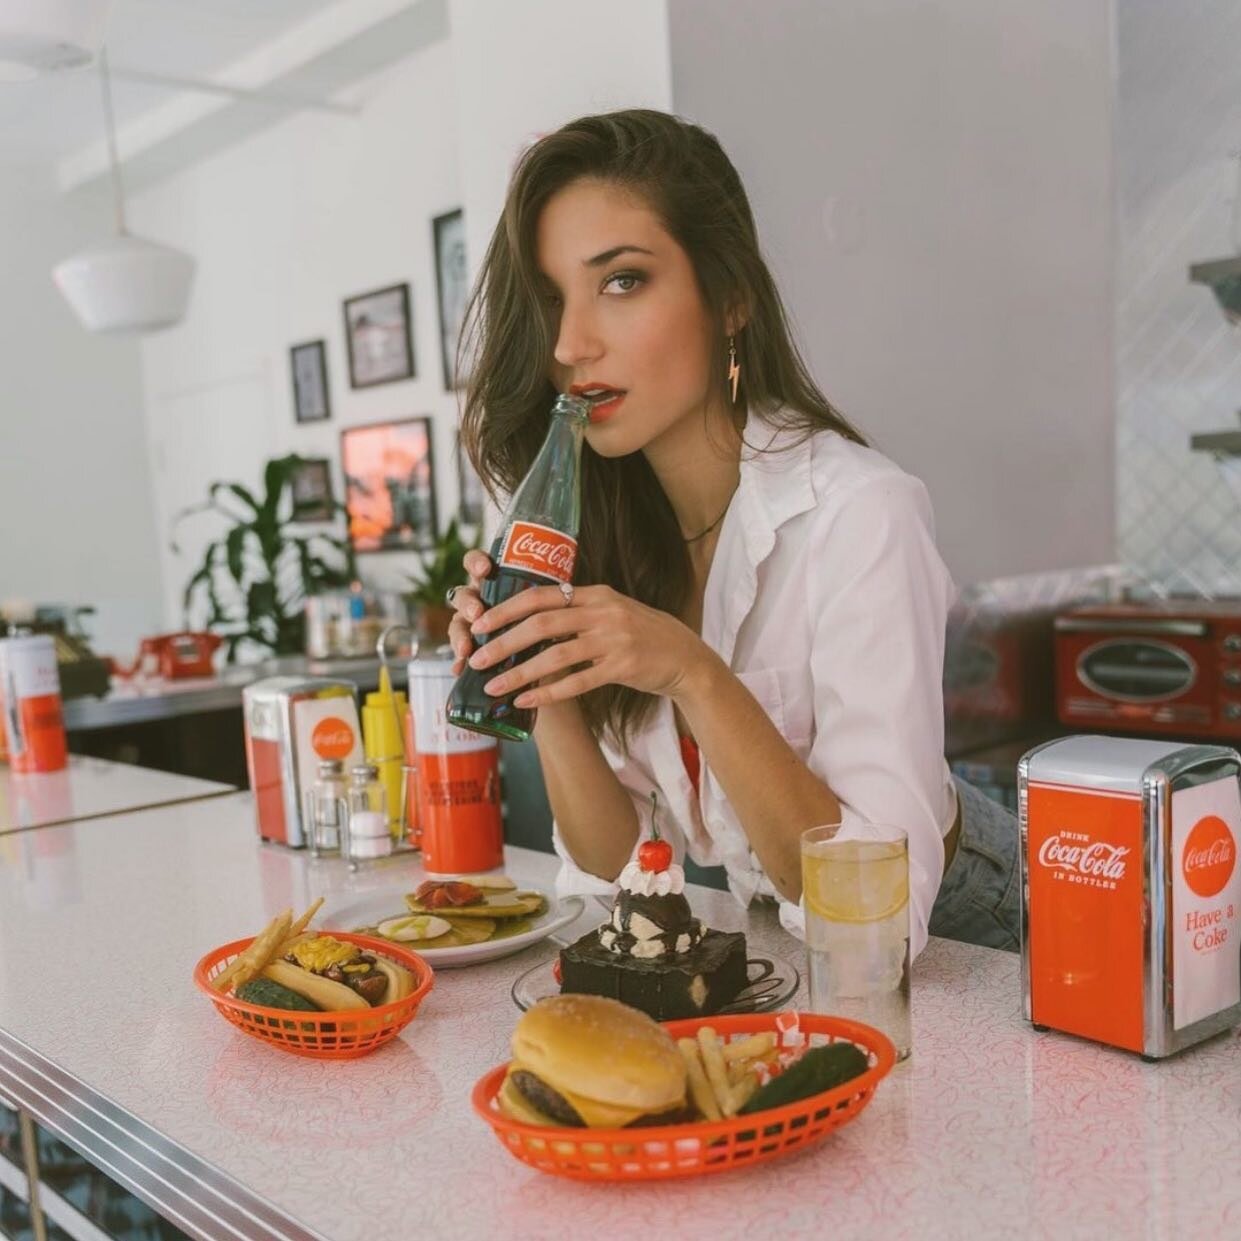 don&rsquo;t talk about me like how you might know how I feel
.
.
.
.
.
.
.
.
.
.
.
.
.
.
.
Location: 50s Diner @theurbanjunglestudio
Model: @siena_thompson
📸: @constantine_photos21